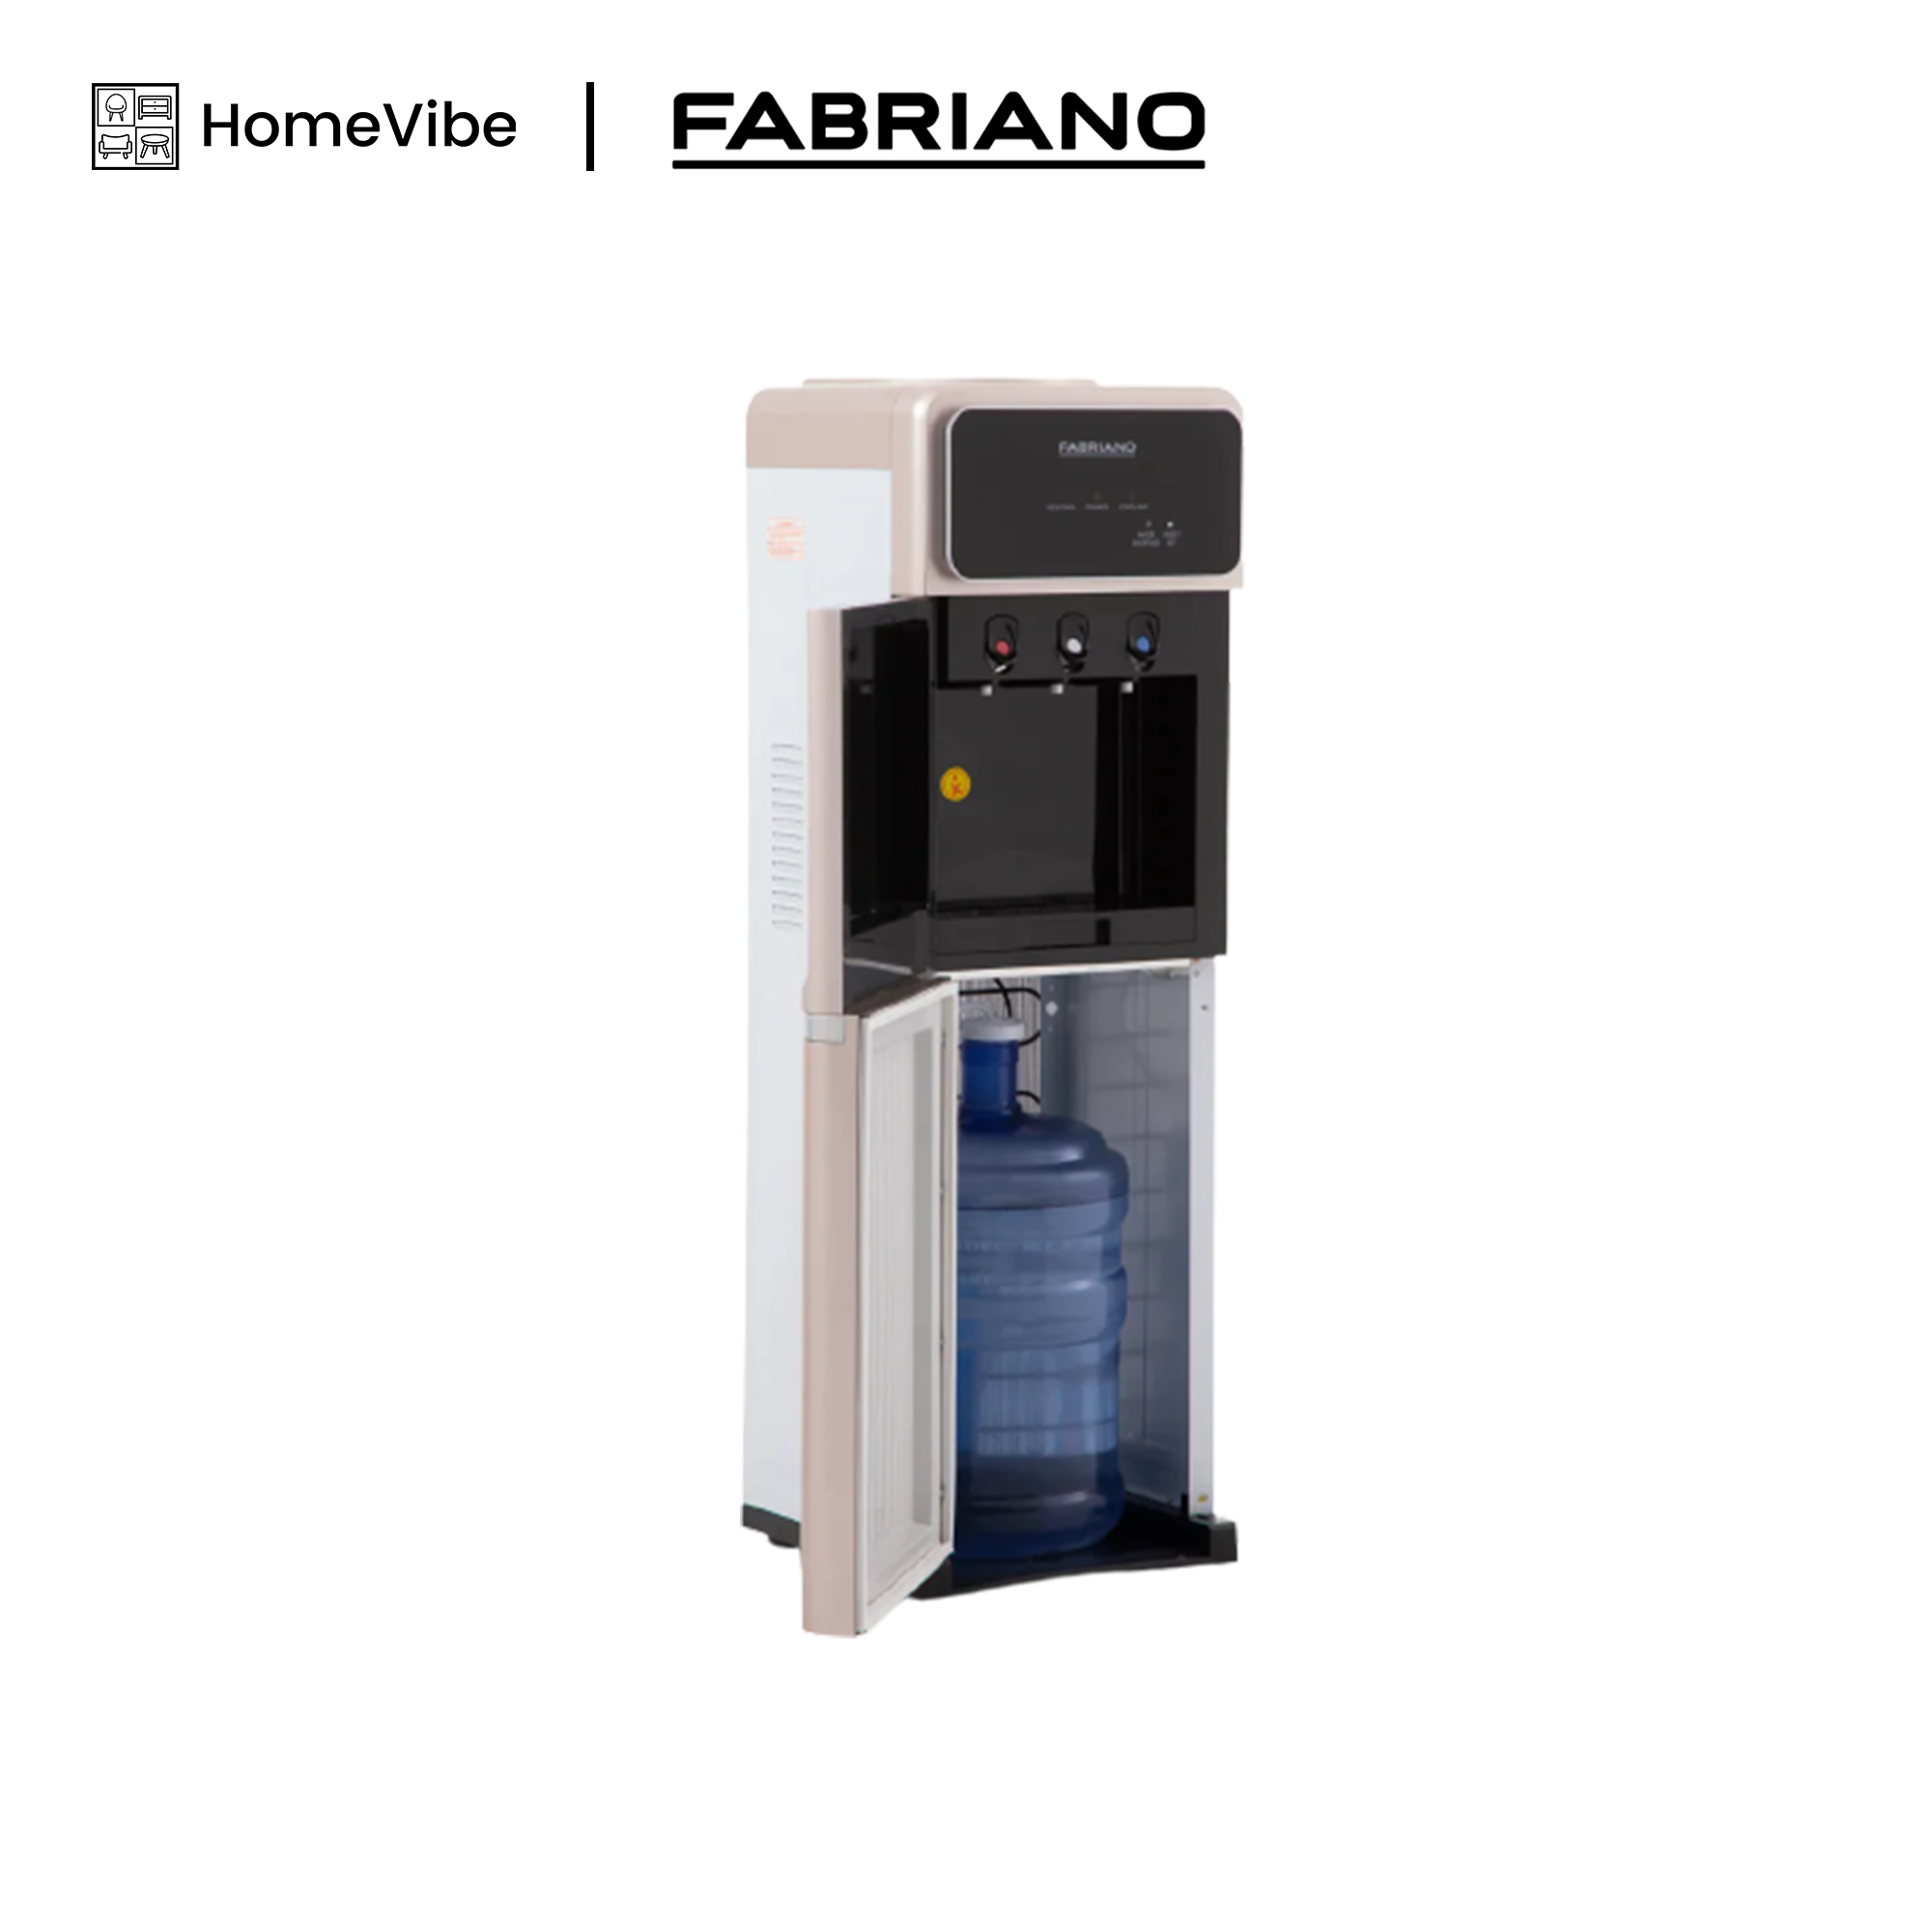 Fabriano Bottom Load Hot and Cold Water Dispenser FWDI3BRG